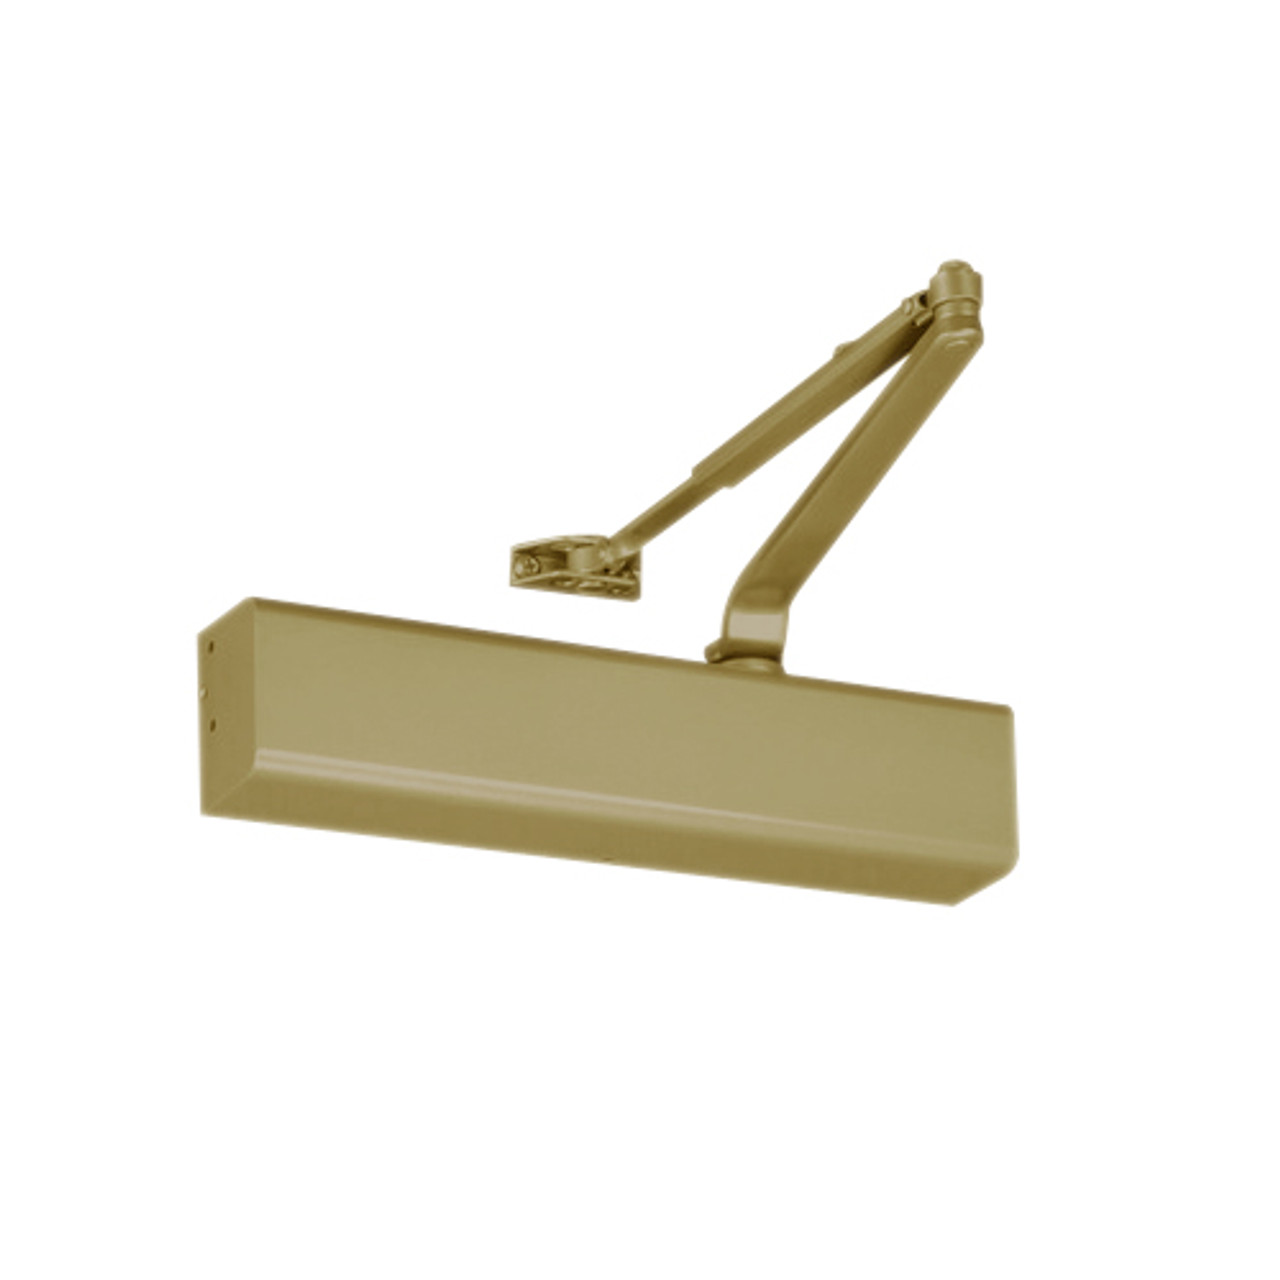 8501M-696 Norton 8000 Series Full Cover Non-Hold Open Door Closers with Regular Parallel and Top Jamb to 3 inch Reveal in Gold Finish